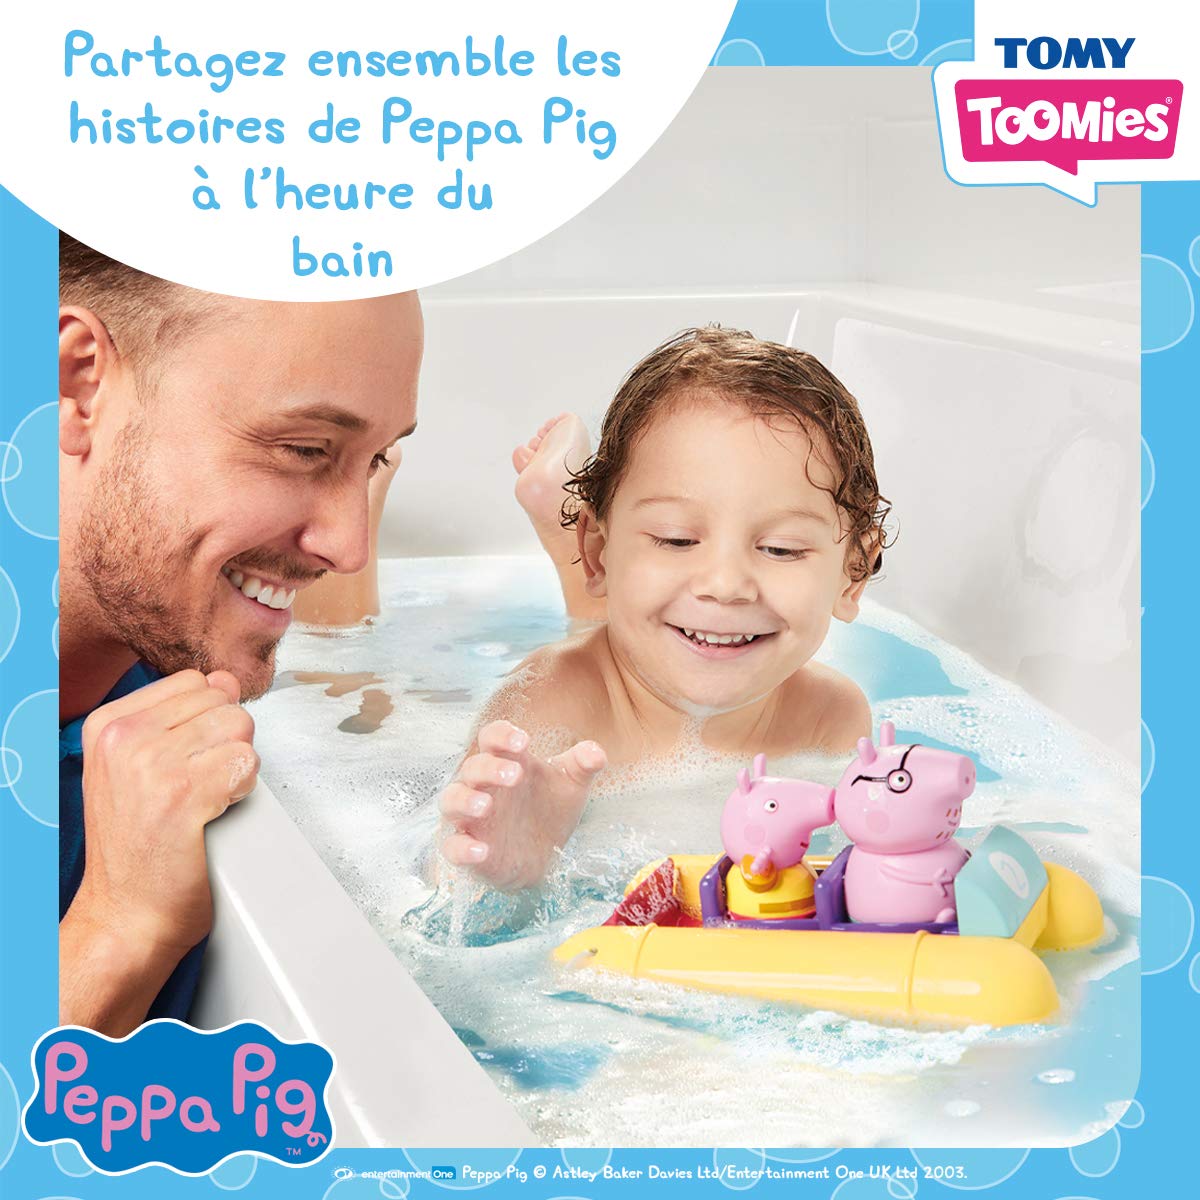 Toomies Tomy Peppa Pig Pull and Go Pedalo, Baby Bath Toys, Kids Bath Toys for Water Play, Fun Bath Accessories for Babies & Toddlers, Suitable for 18 Months, 2, 3 & 4 Year Olds